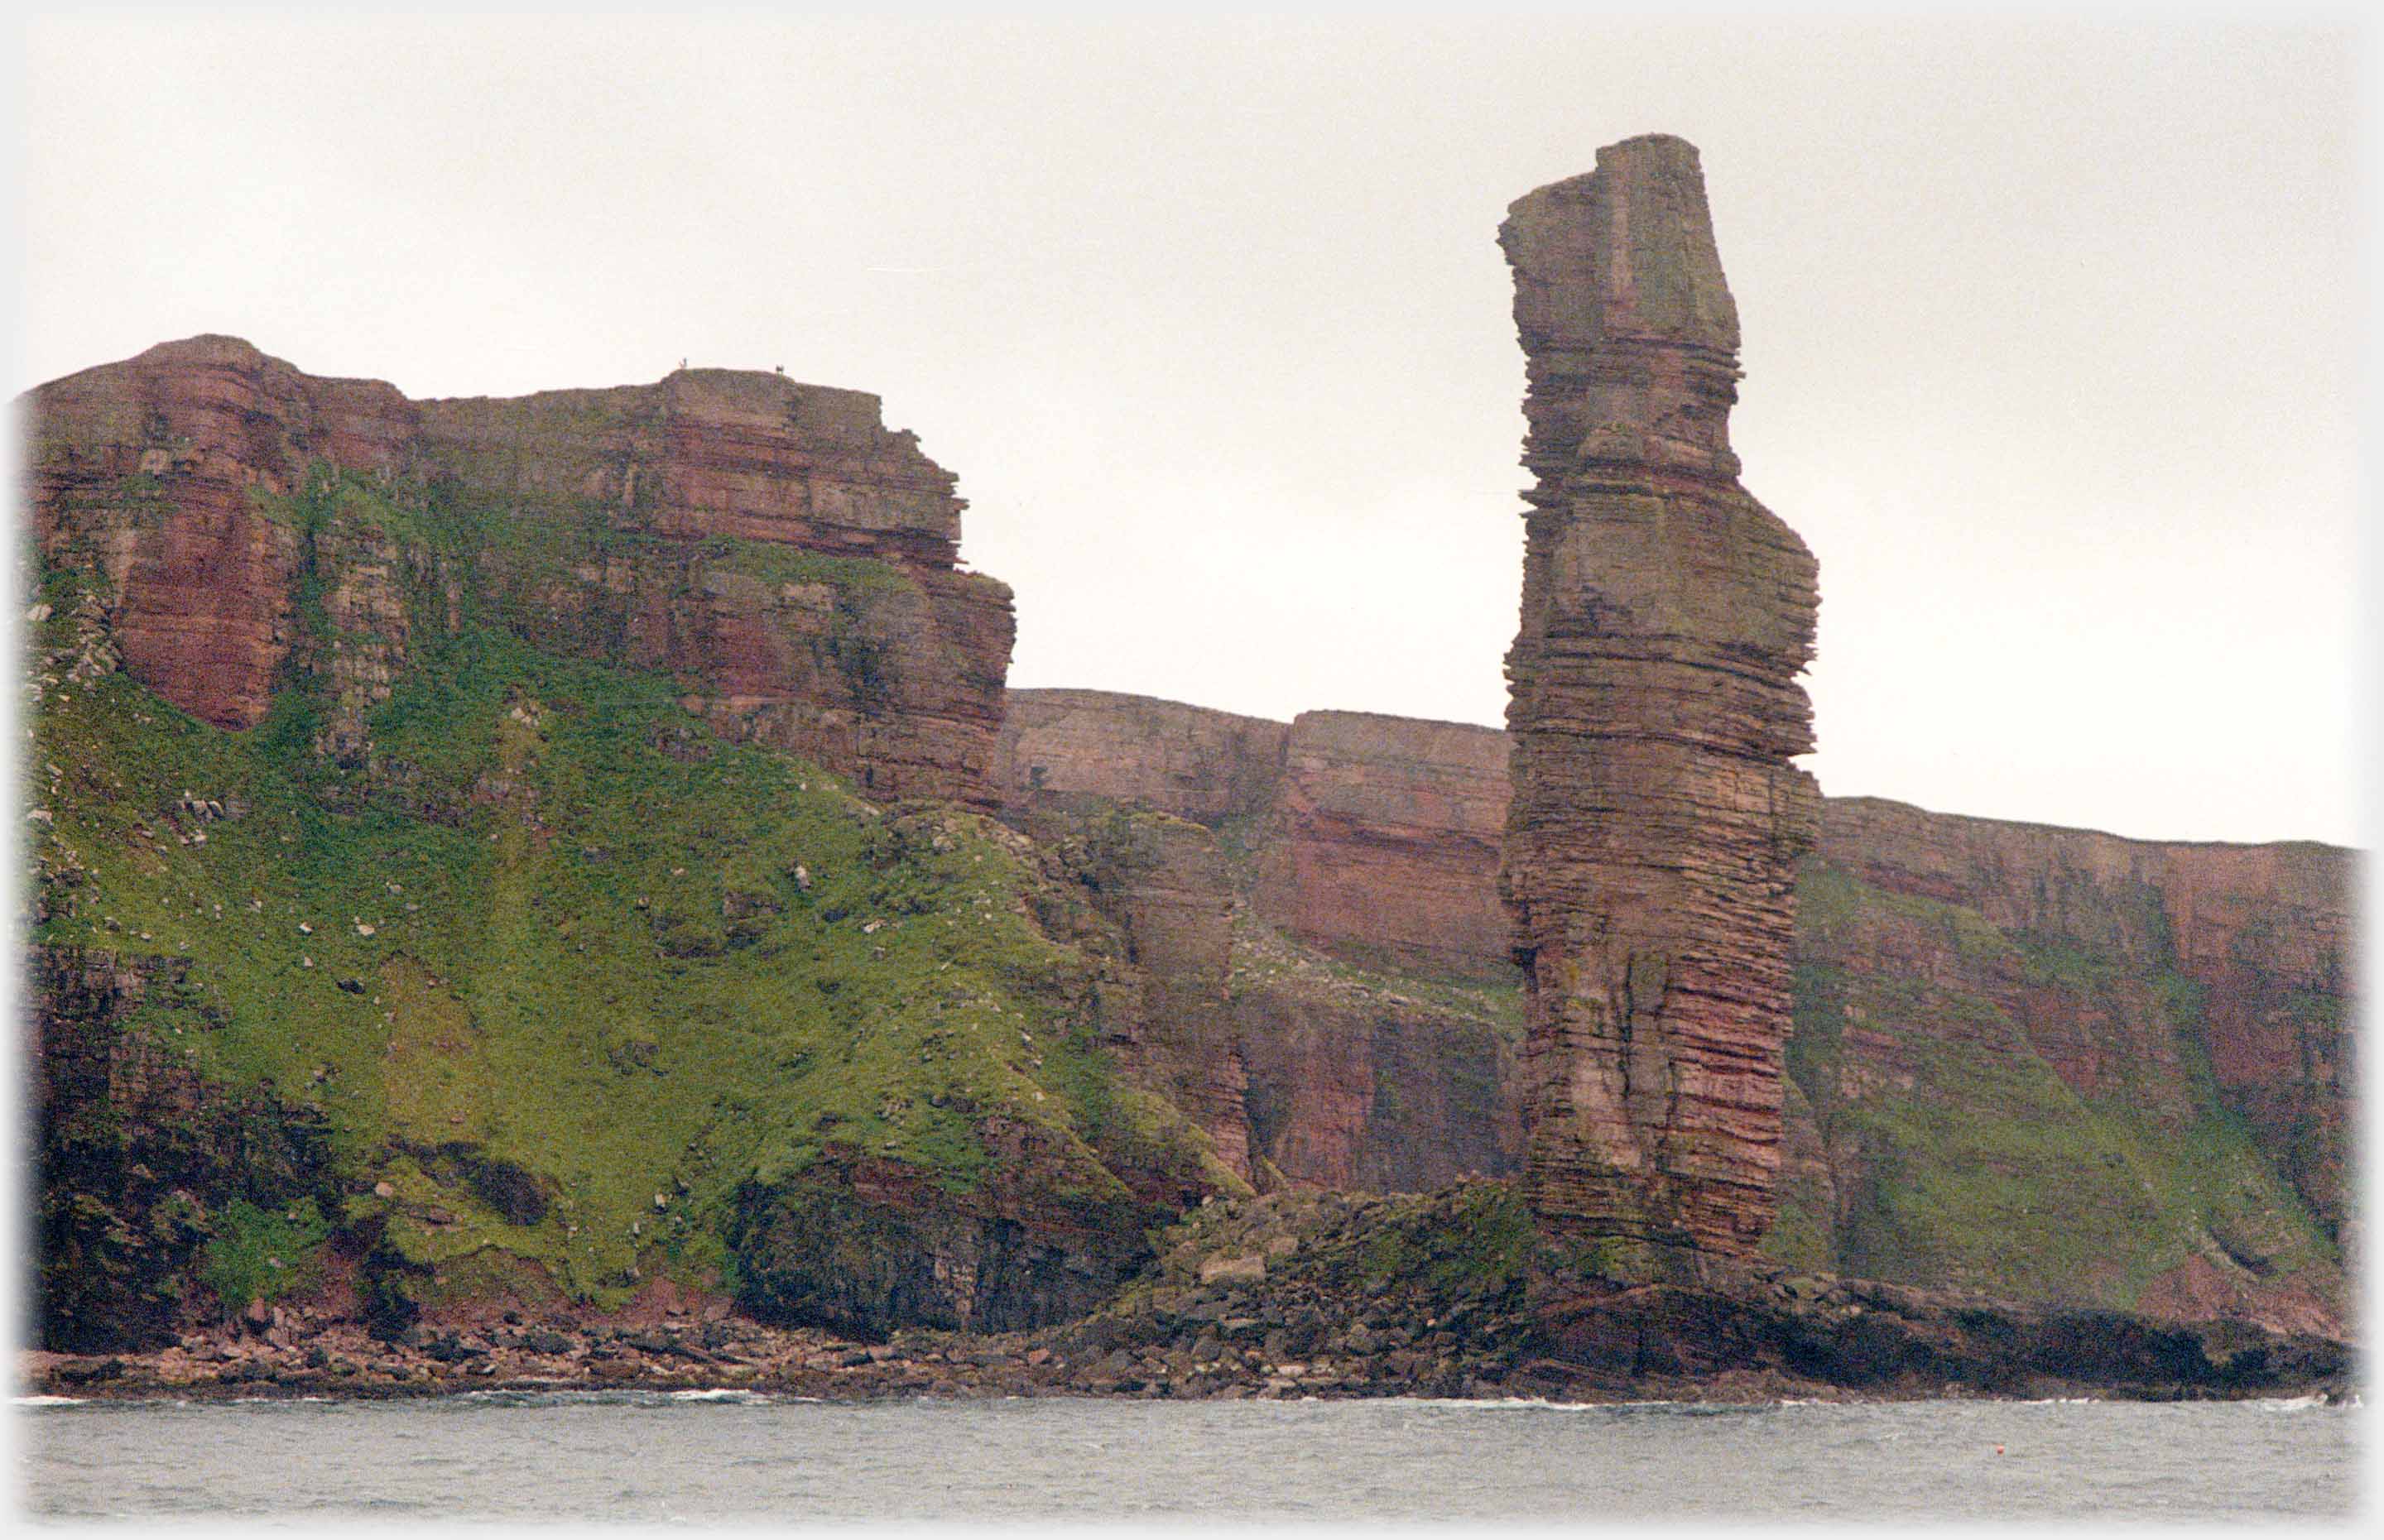 The sandstone pillar that forms the Old Man of Hoy.